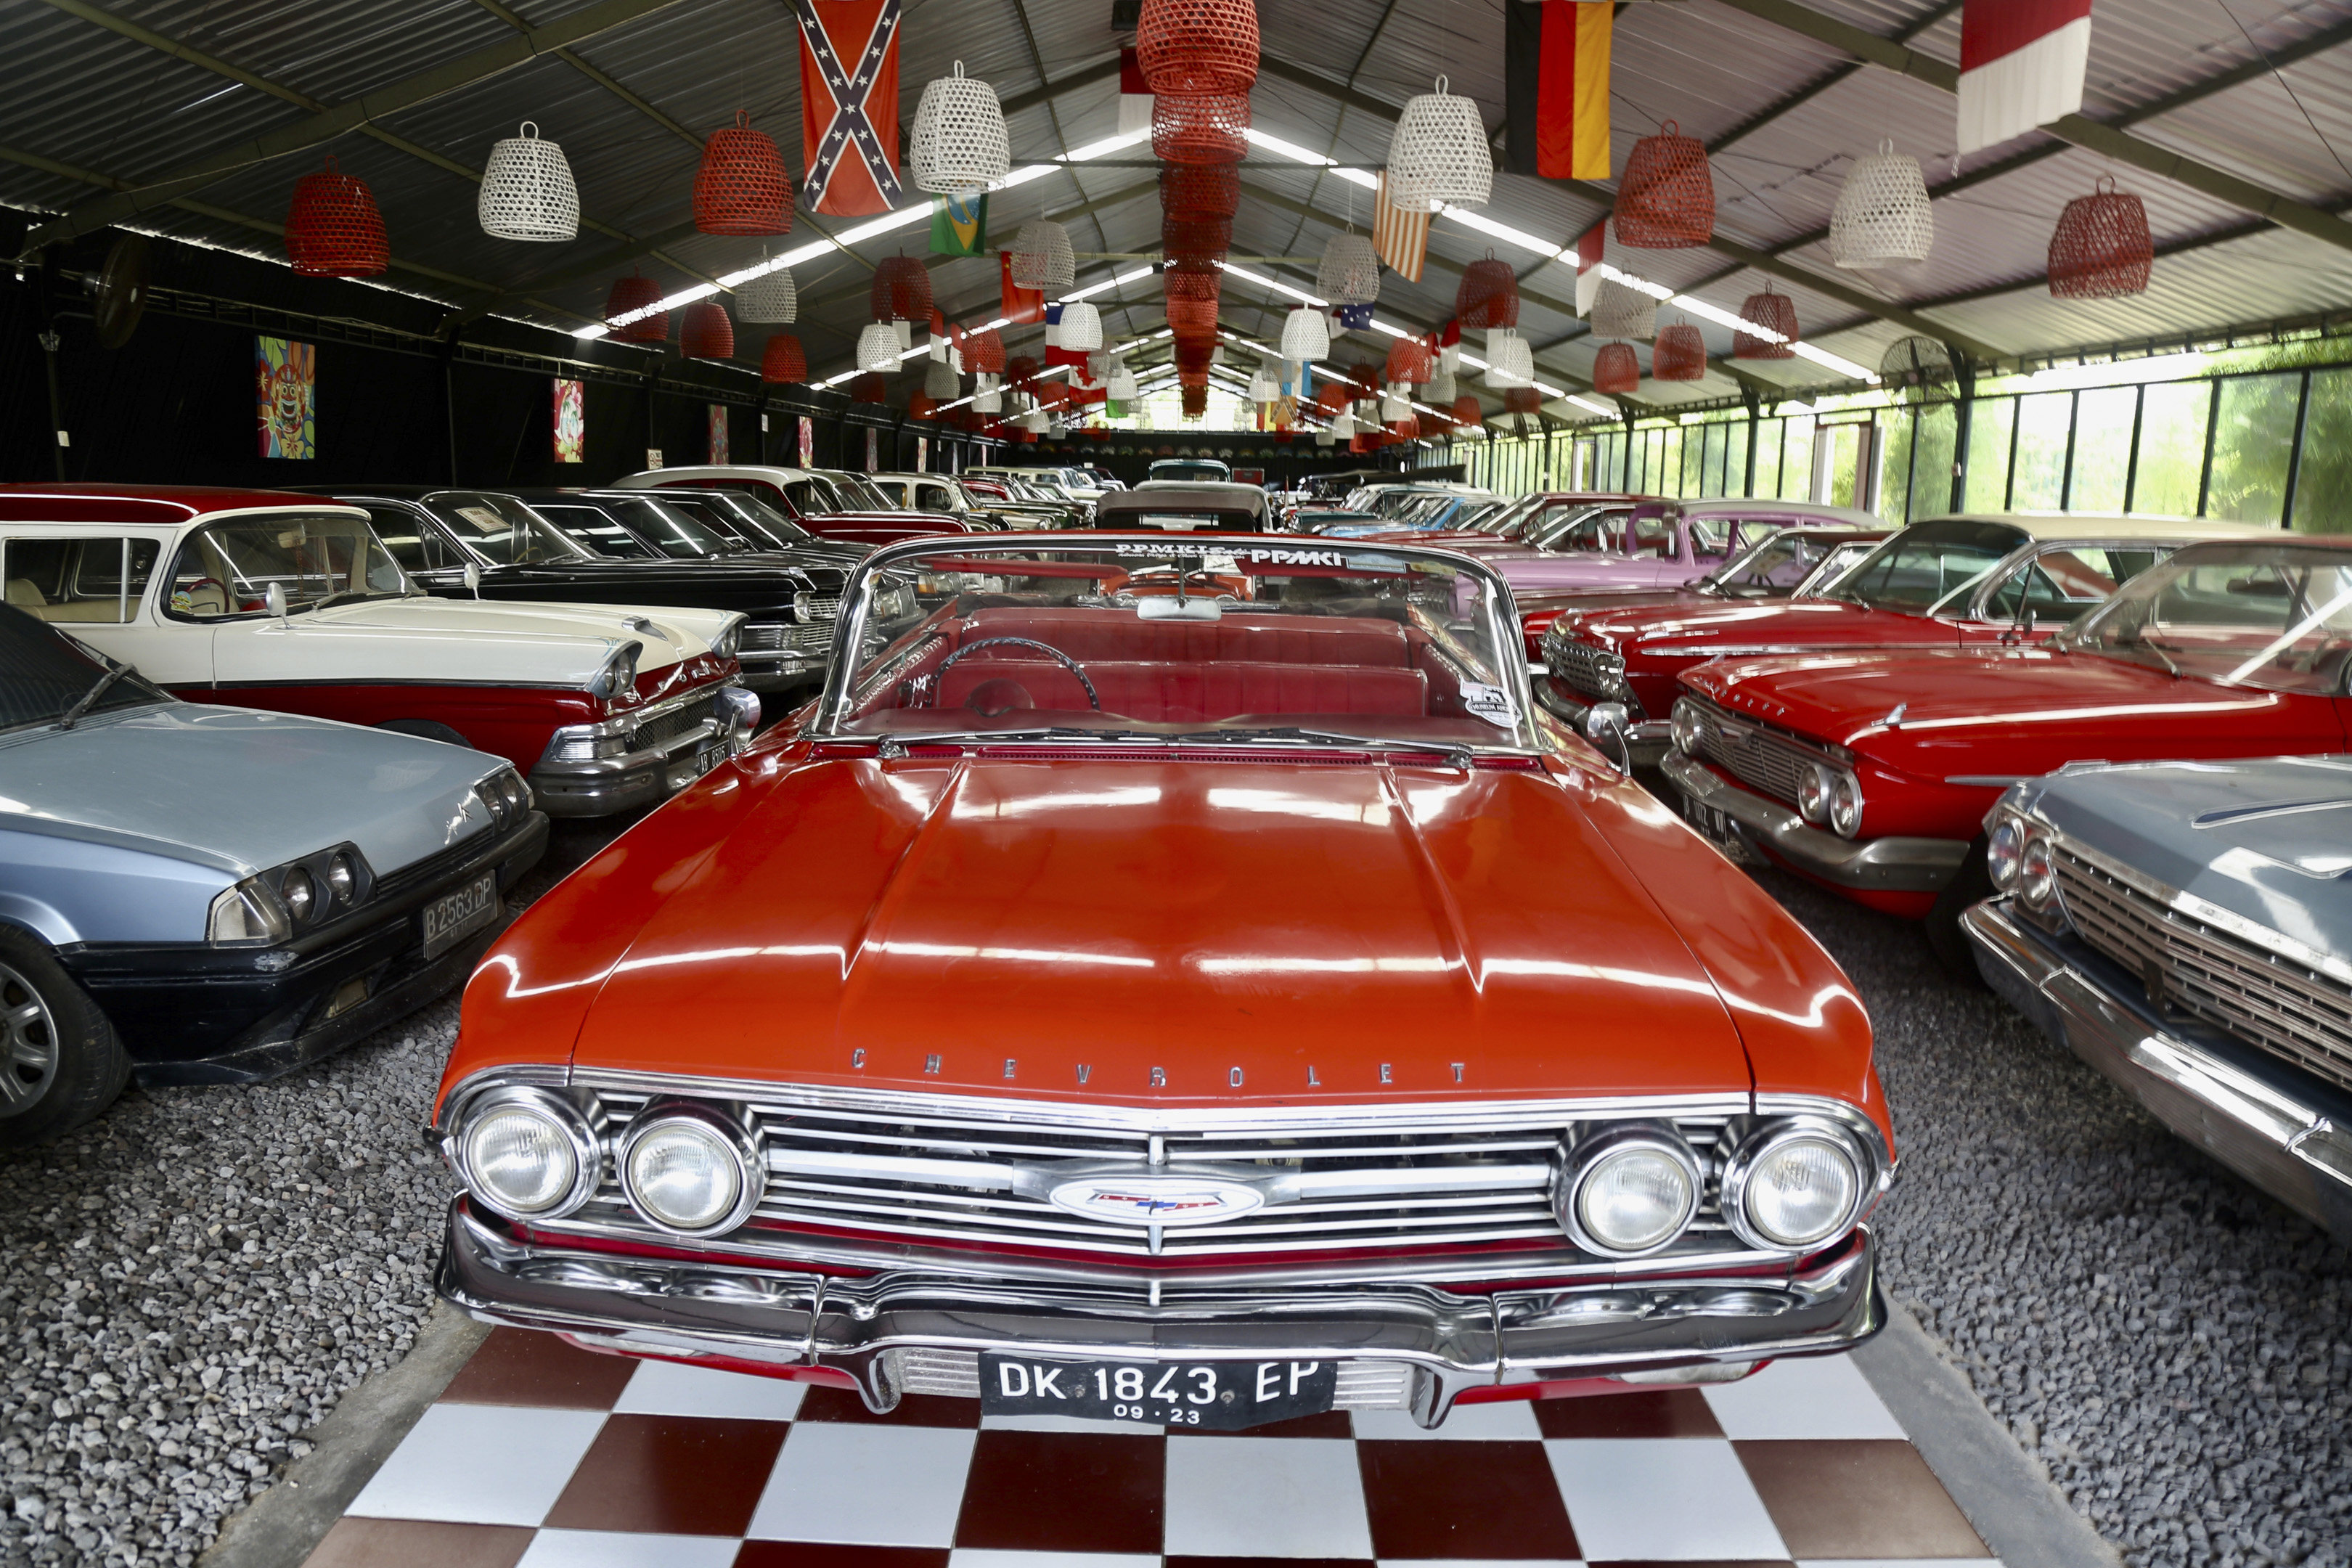 A fire-engine red Chevy Impala 60 cabriolet sits as a centrepiece in one of the airport-size hangars at Kebon Vintage Cars in Bali. Photo: Ian Neubauer